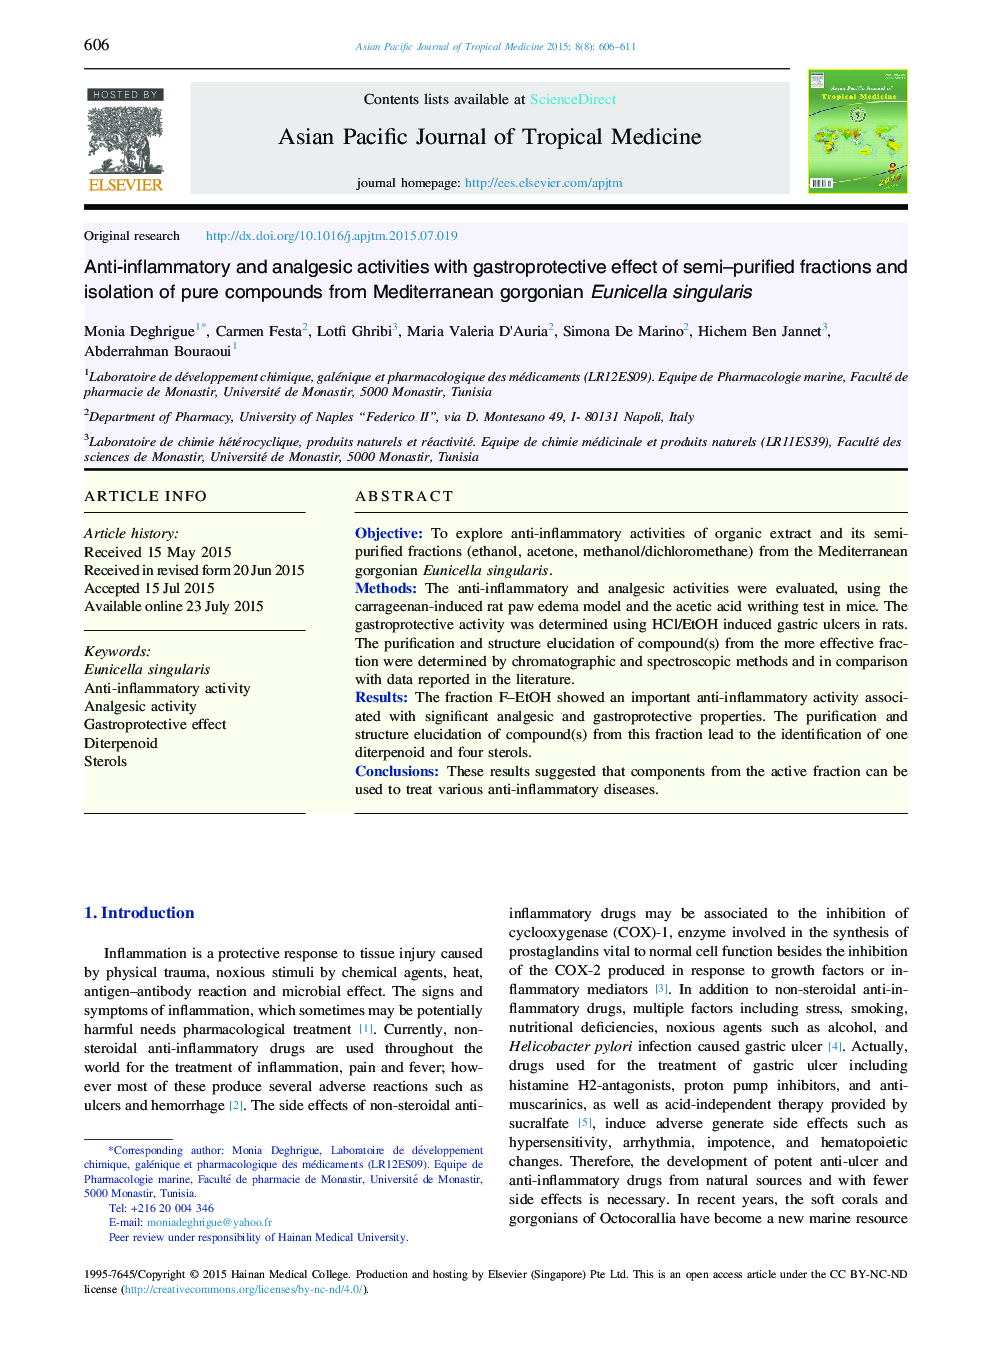 Anti-inflammatory and analgesic activities with gastroprotective effect of semi–purified fractions and isolation of pure compounds from Mediterranean gorgonian Eunicella singularis 